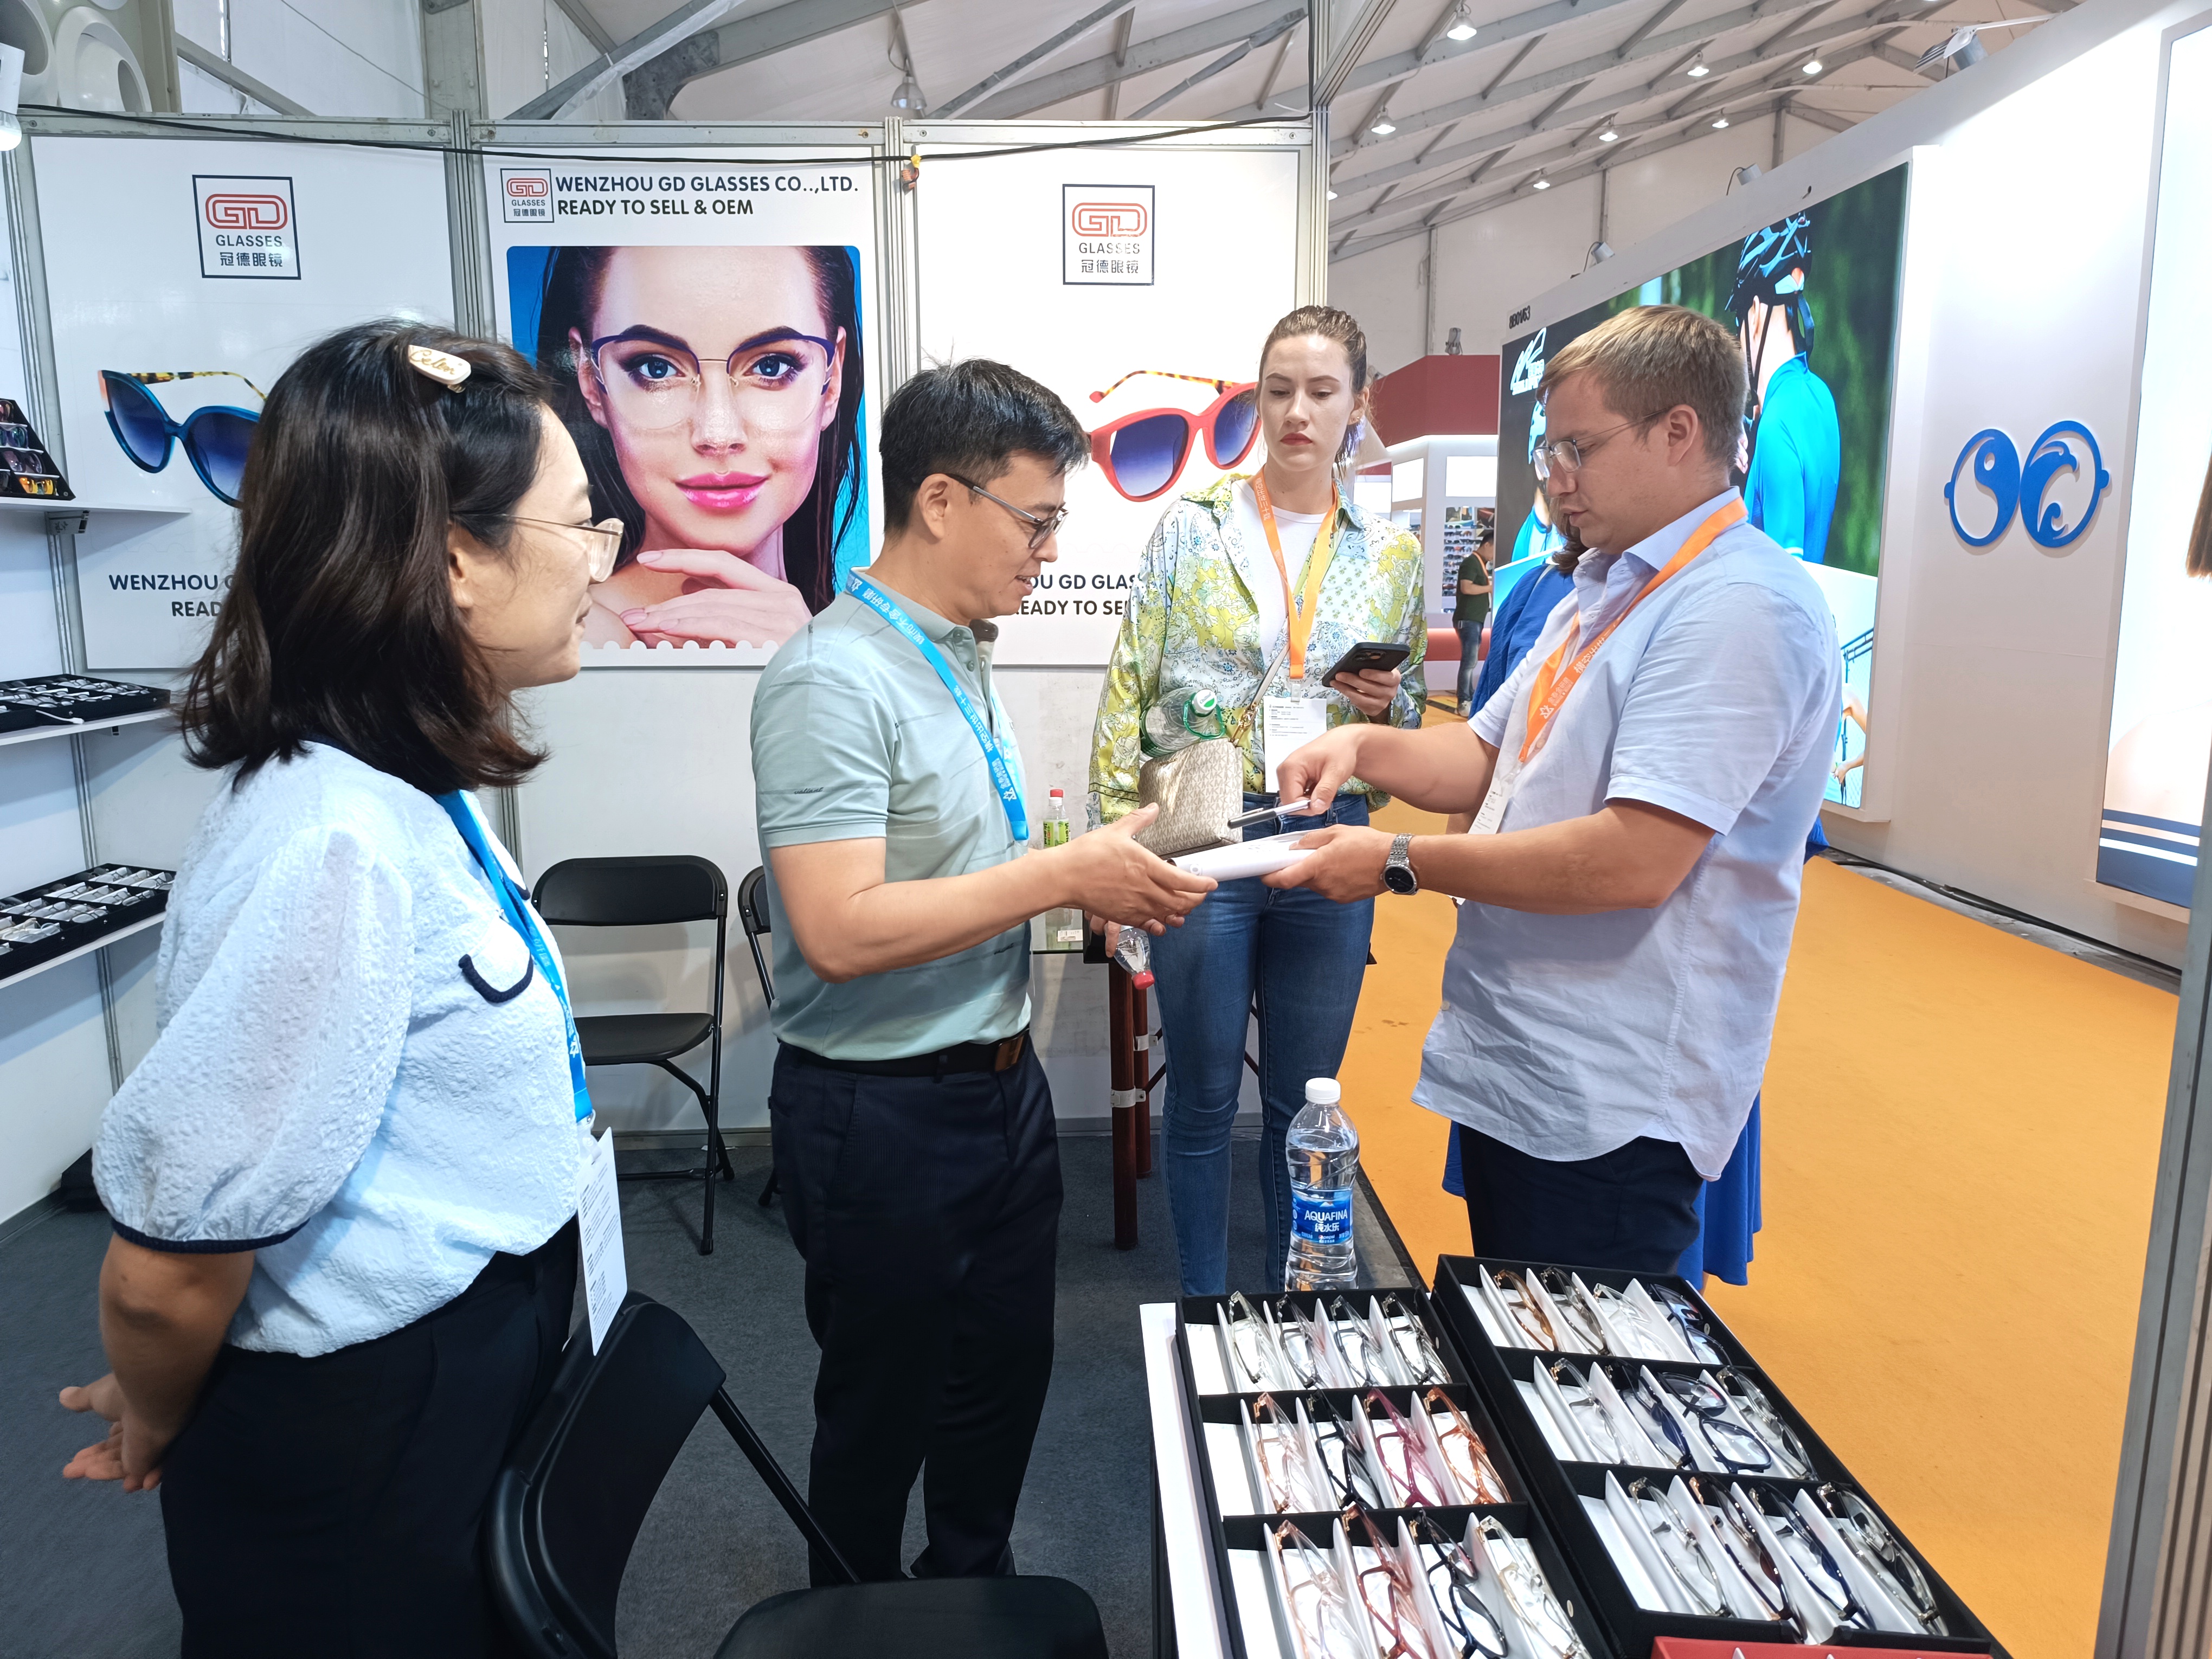 Our Company Booth at the Wenzhou Eyewear Exhibition A Resounding Success